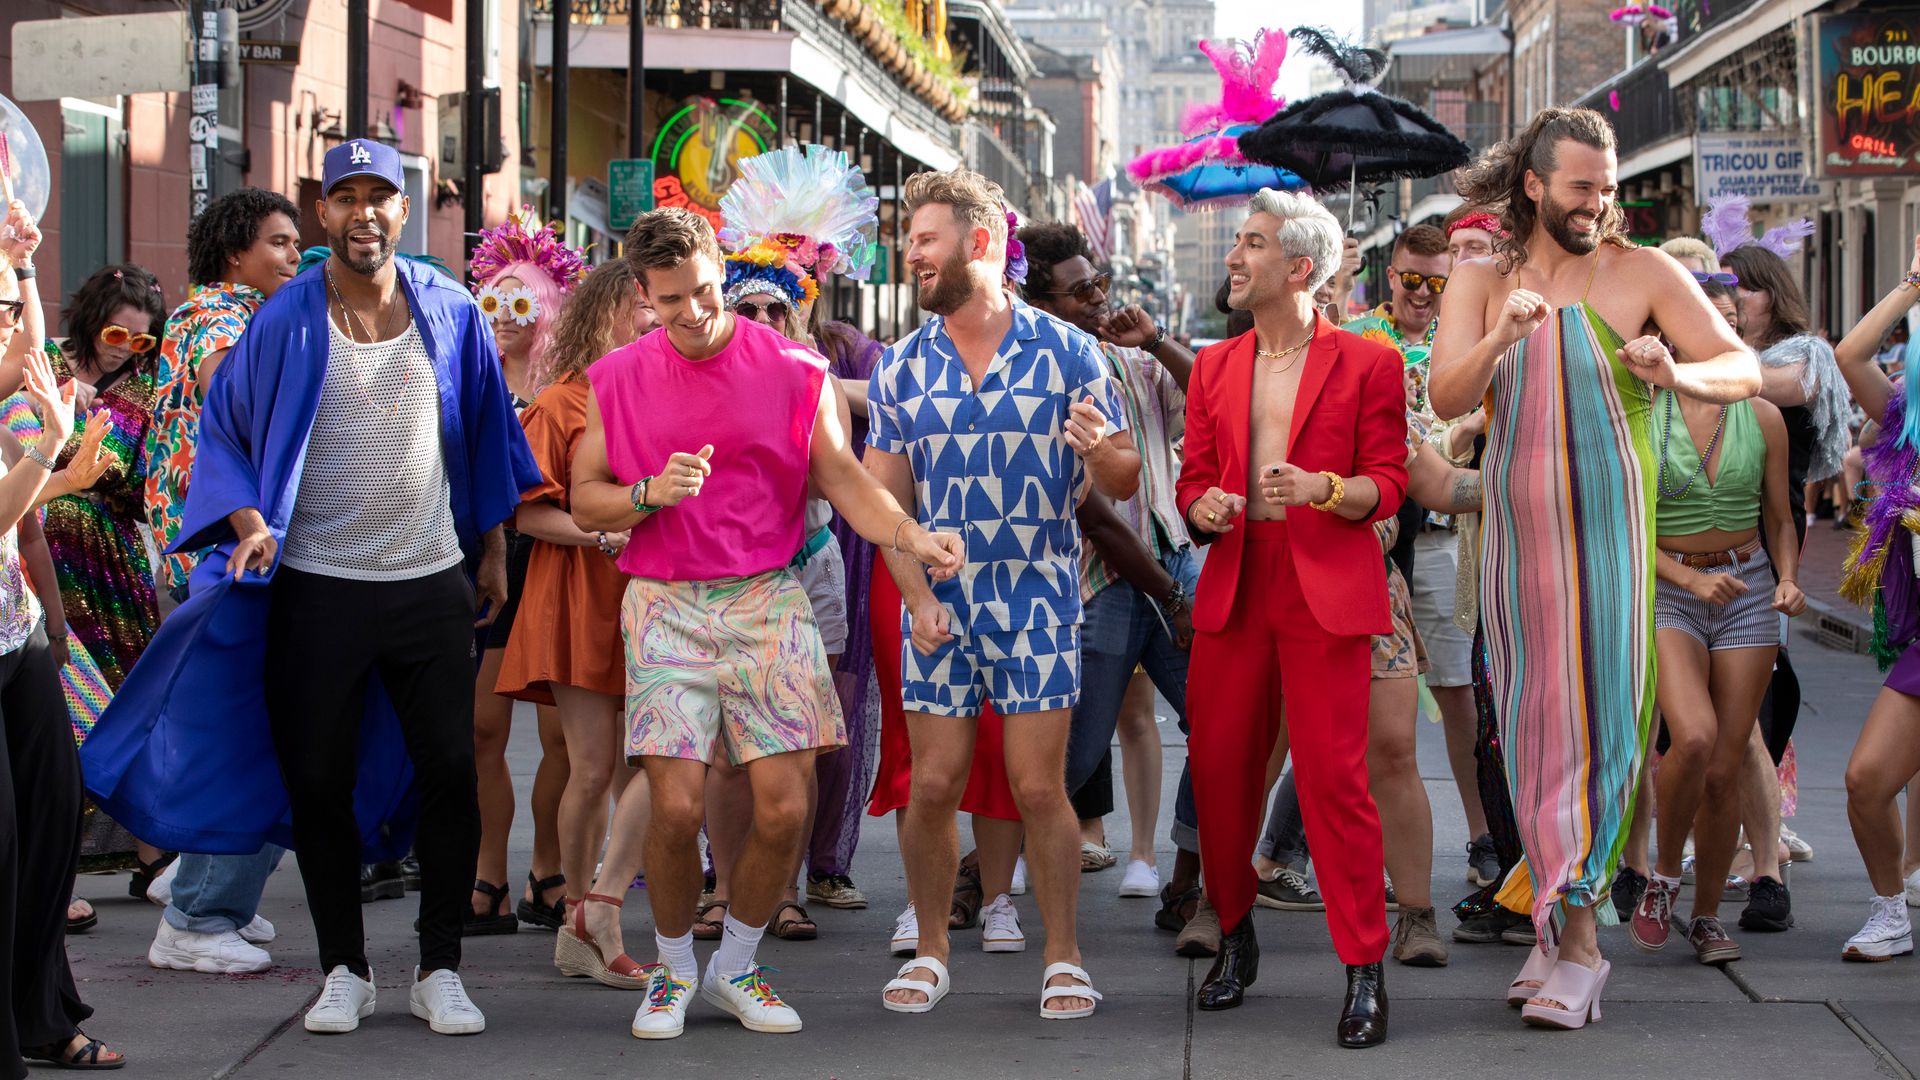 The Queer Eye cast dances with a crowd on a busy Bourbon Street